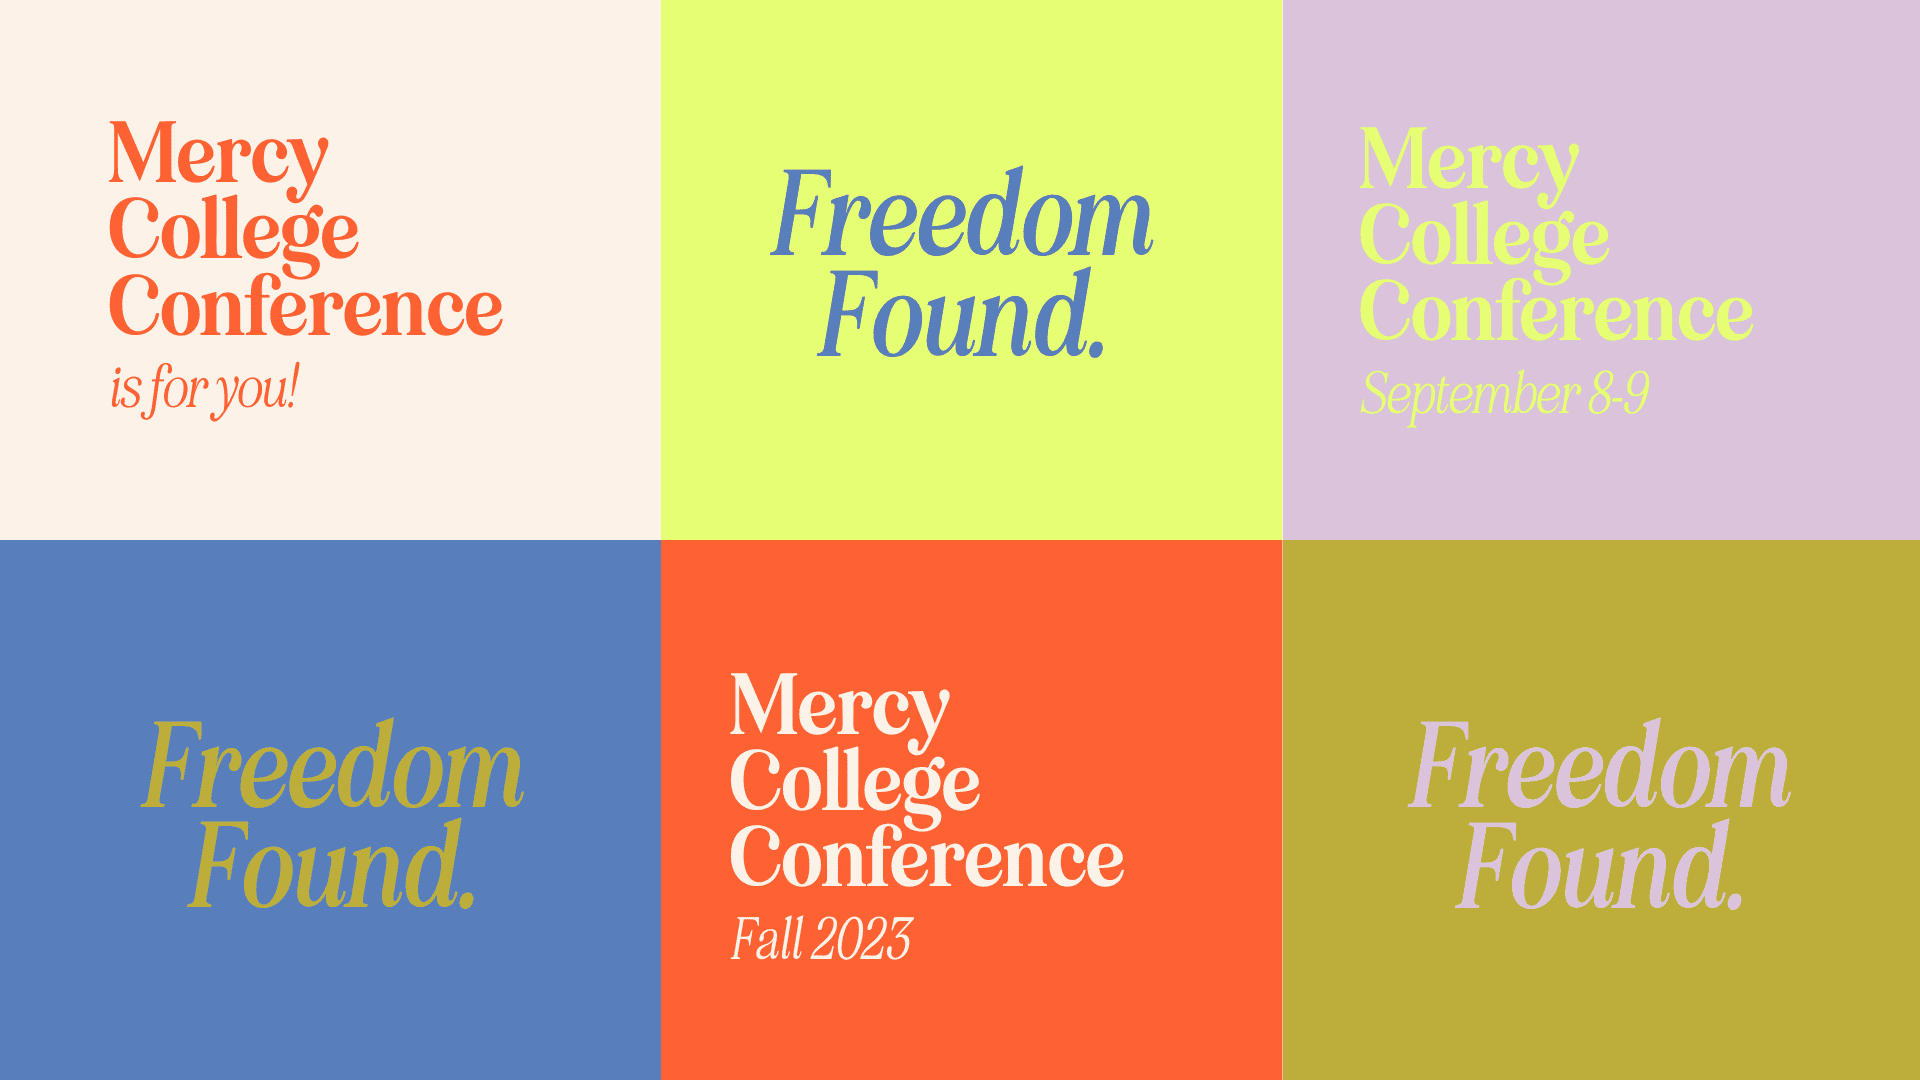 Mercy College Conference